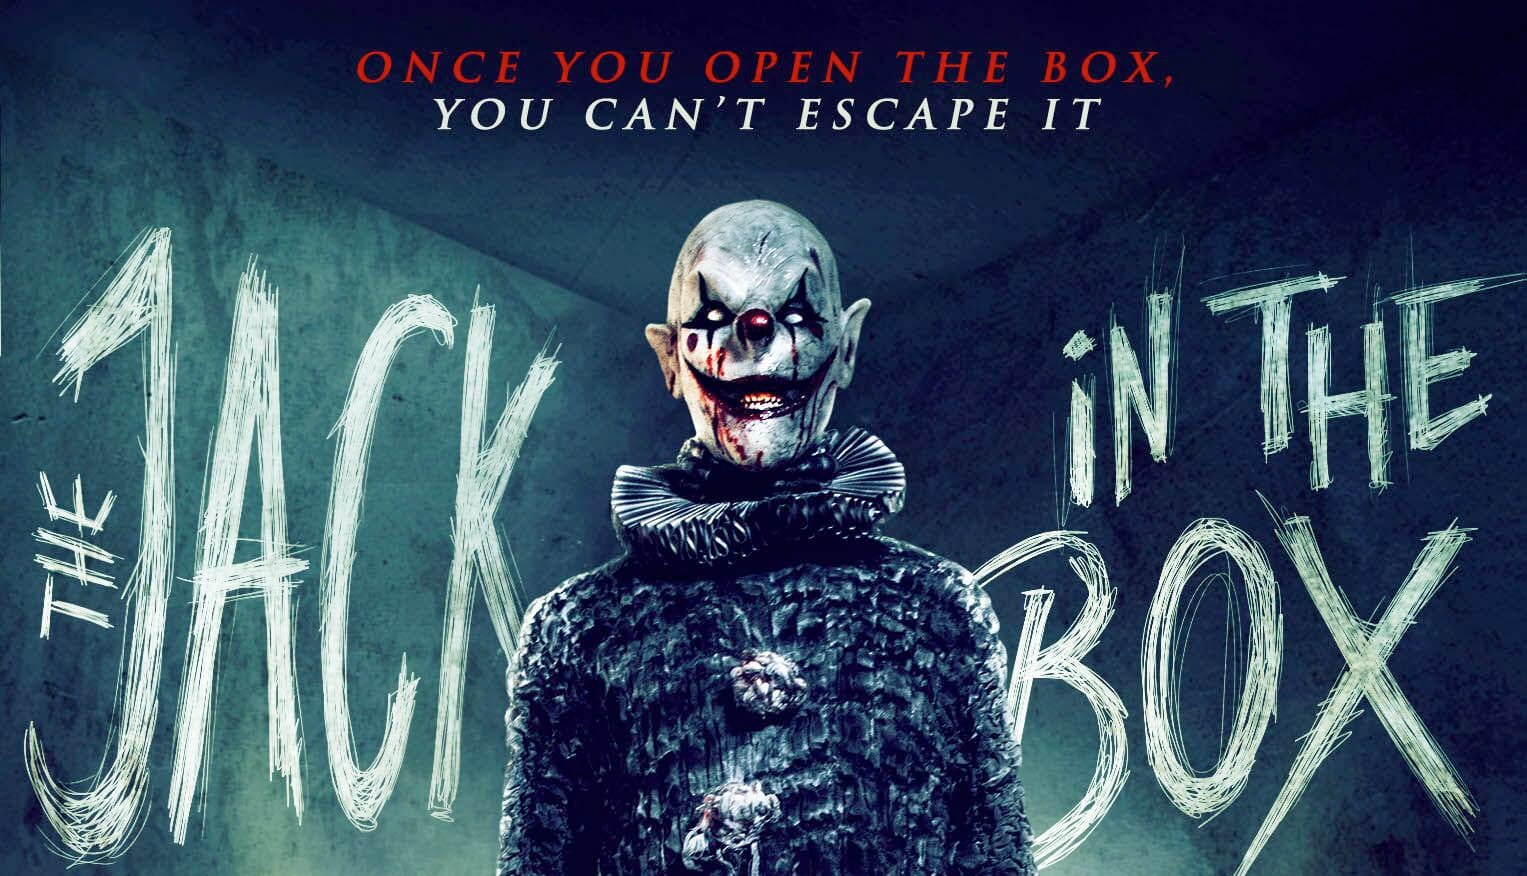 Trailer: The Jack in the Box (2020)